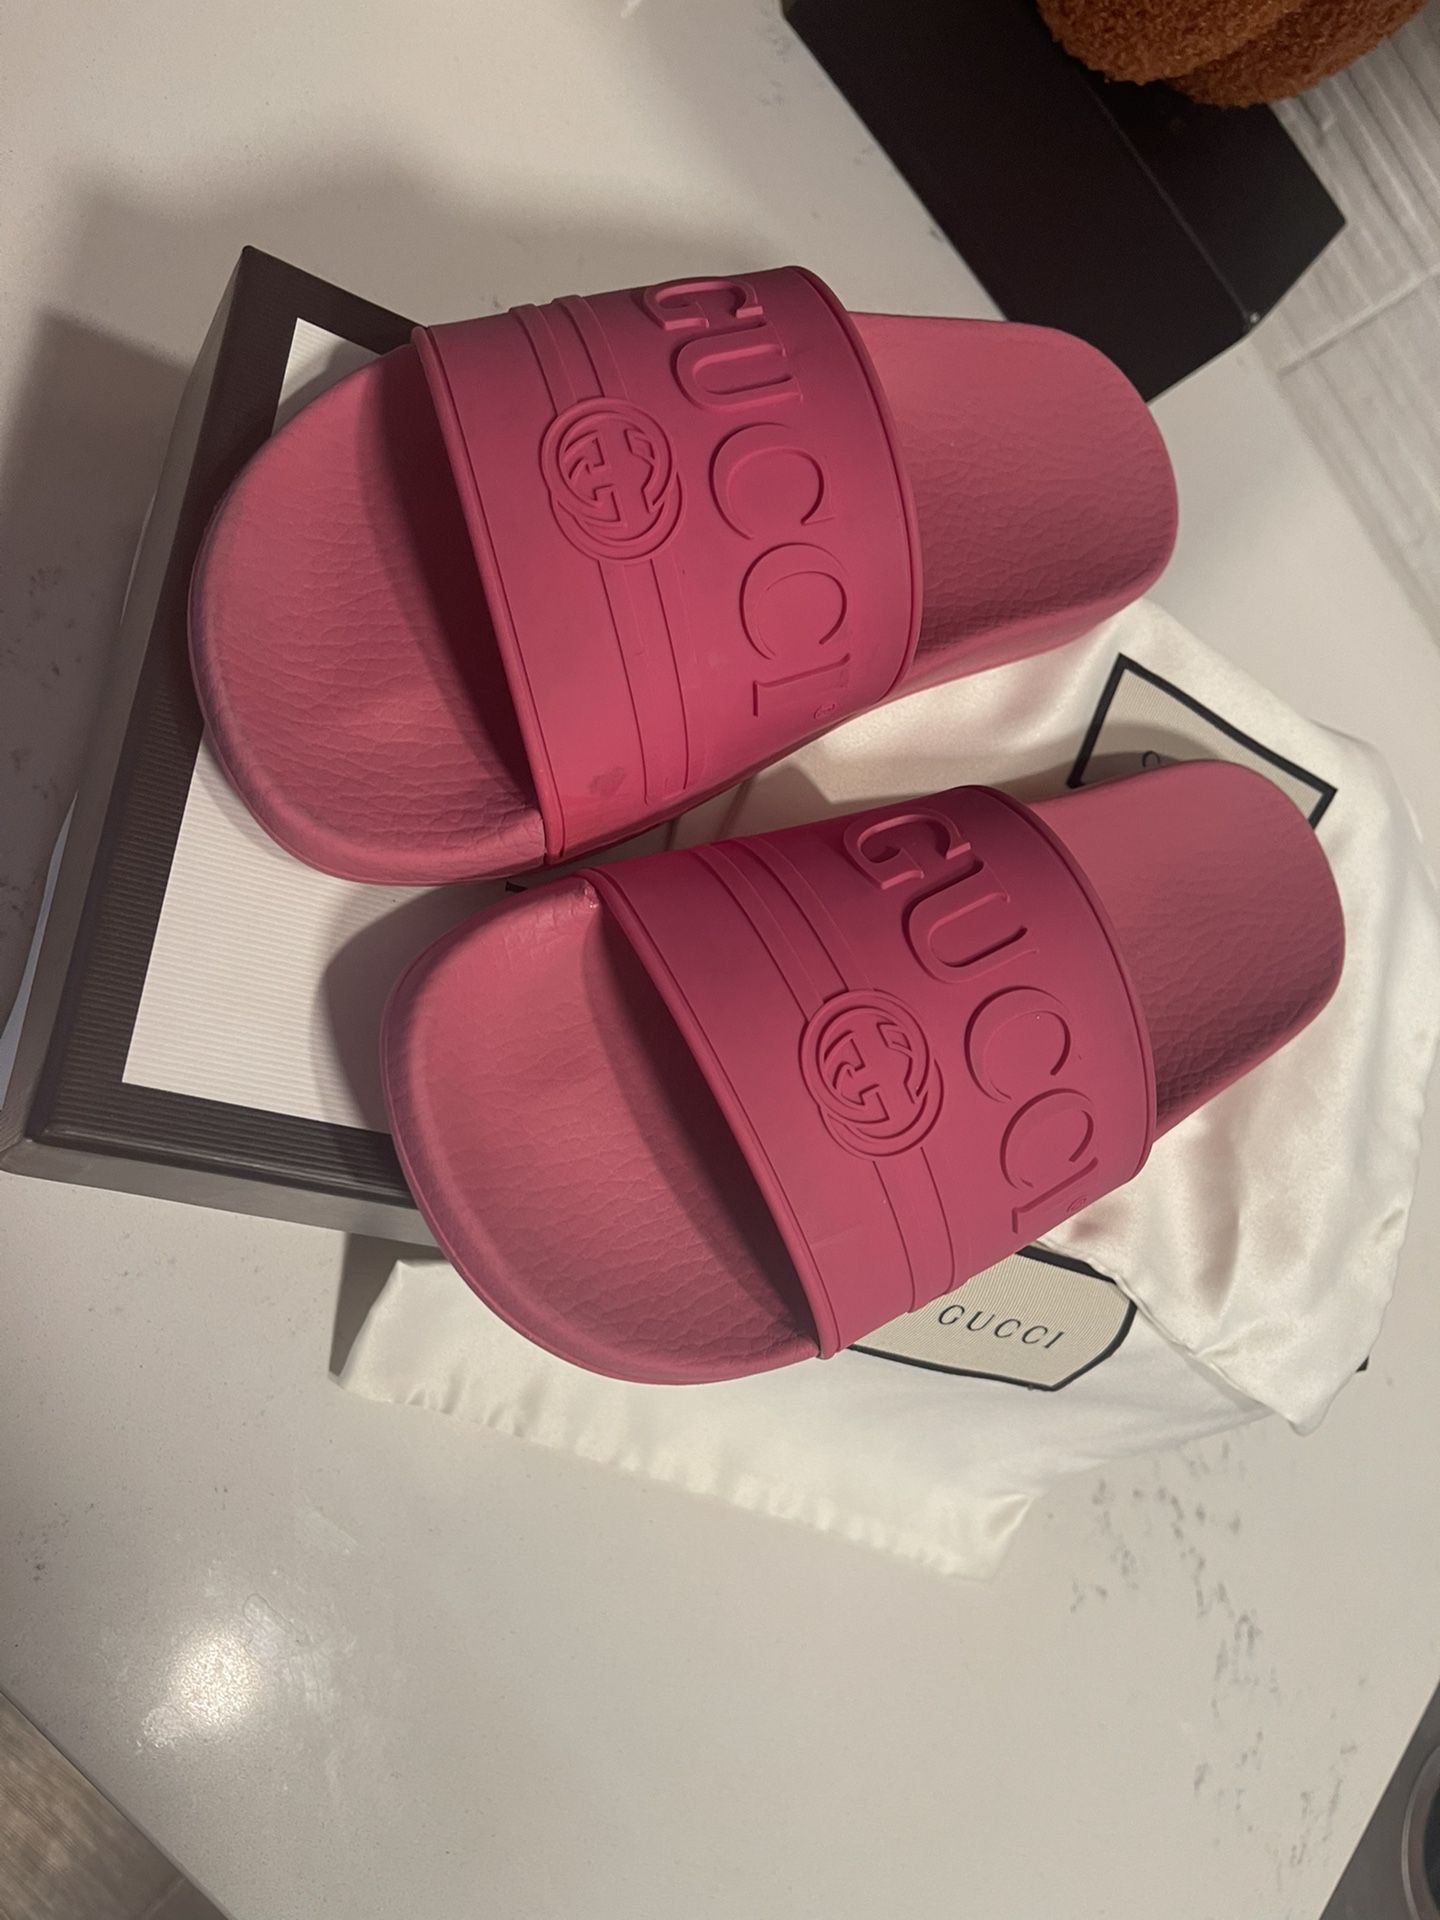  Authentic Gucci Flip Flops *used  2 Dust Bags And Box Included 